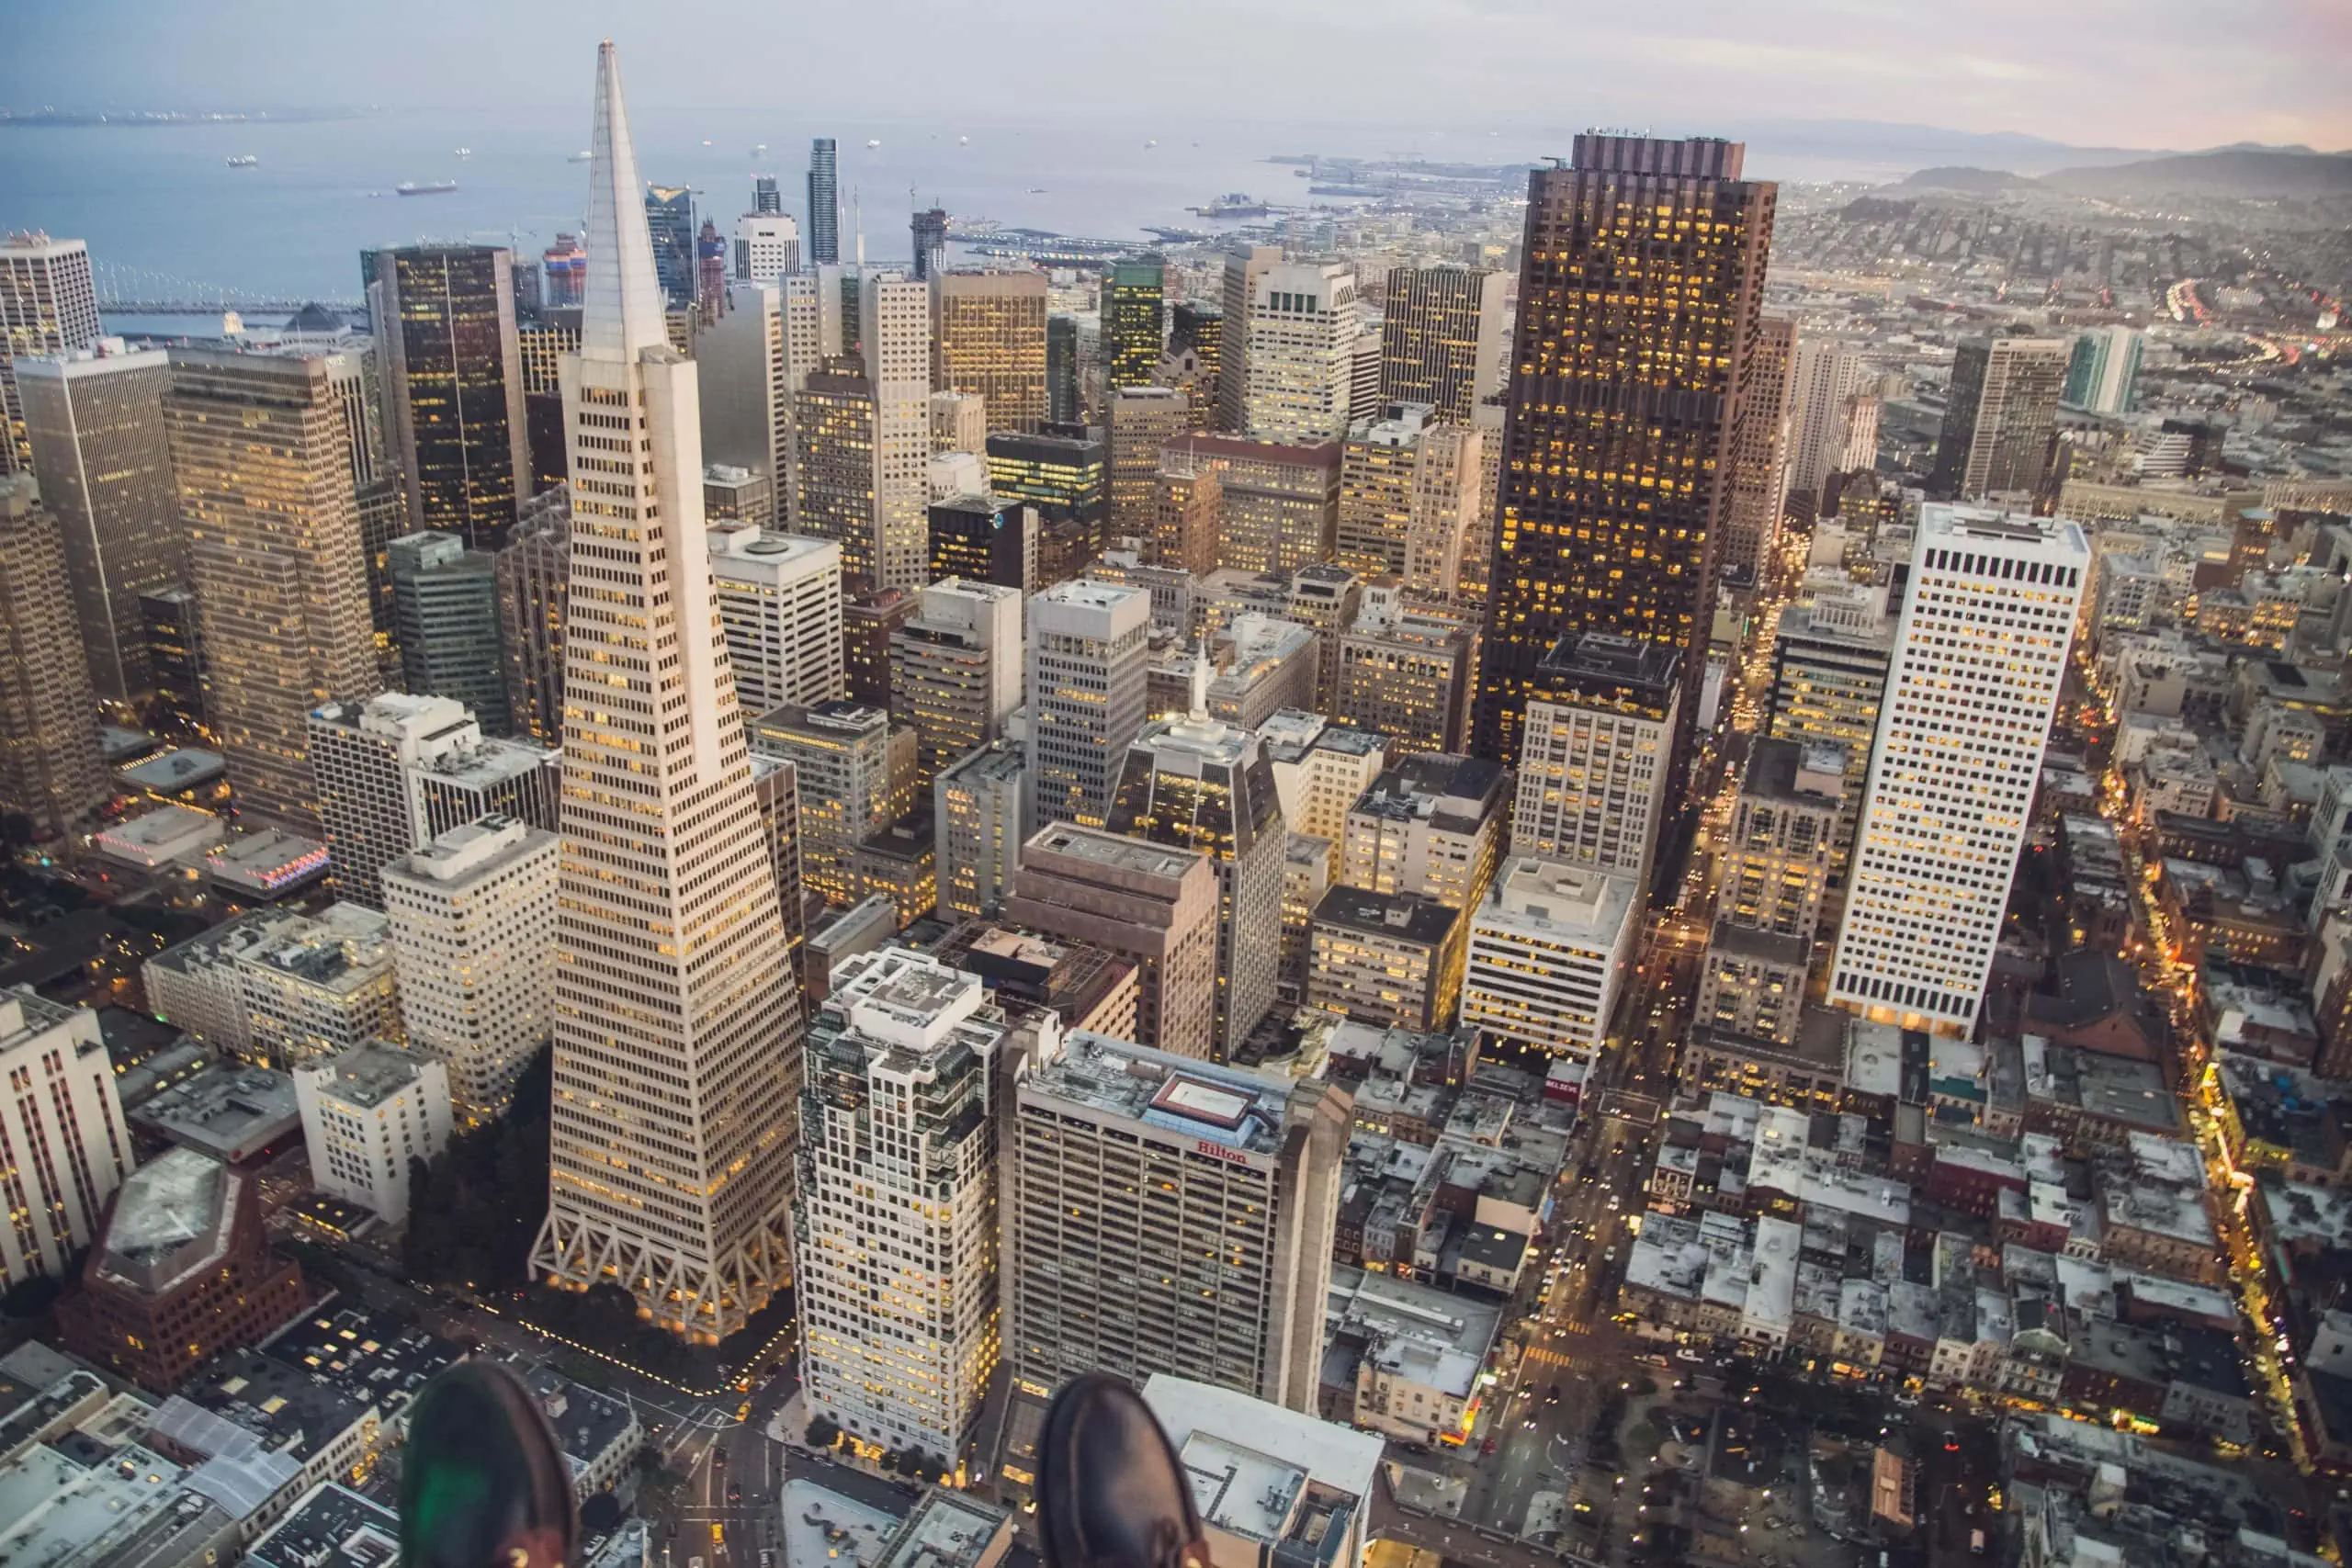 Aerial view of San Francisco downtown with businesses that have security cameras